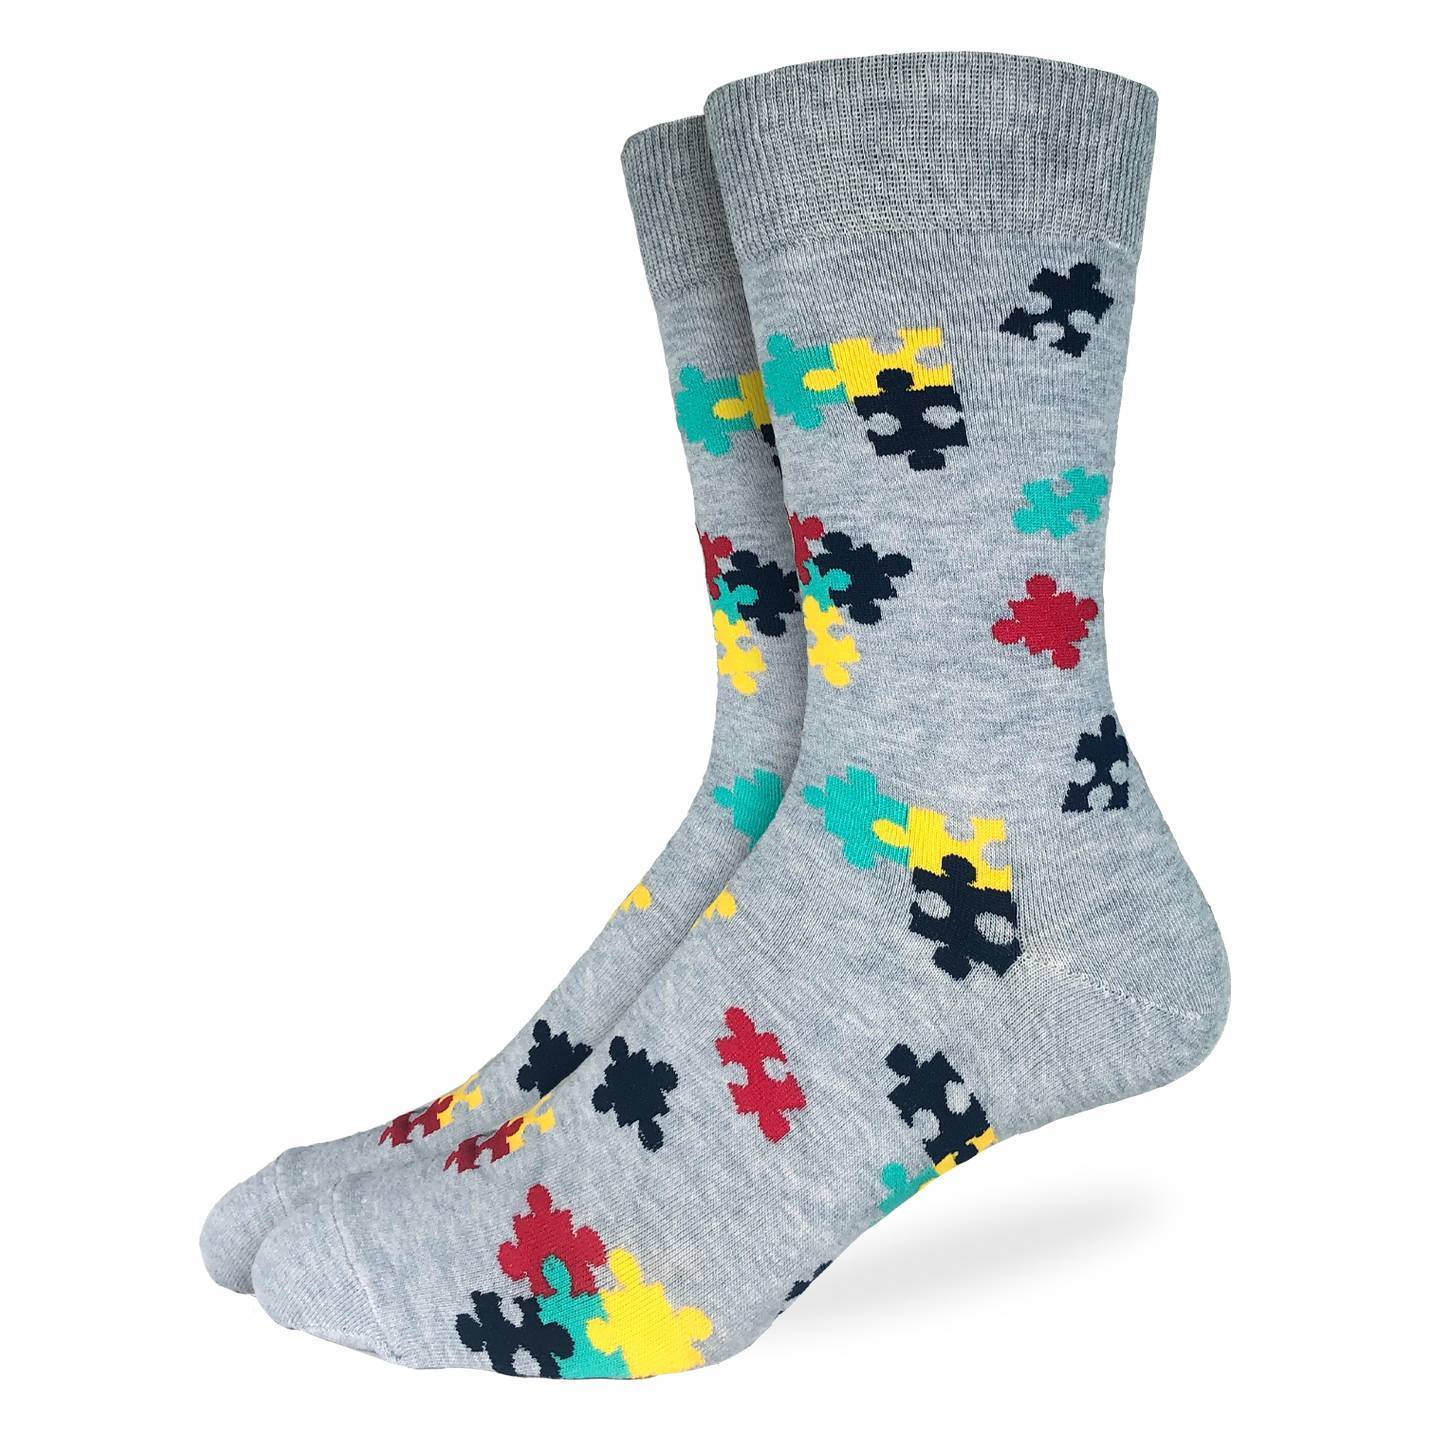 Good Luck Sock - Puzzle Pieces